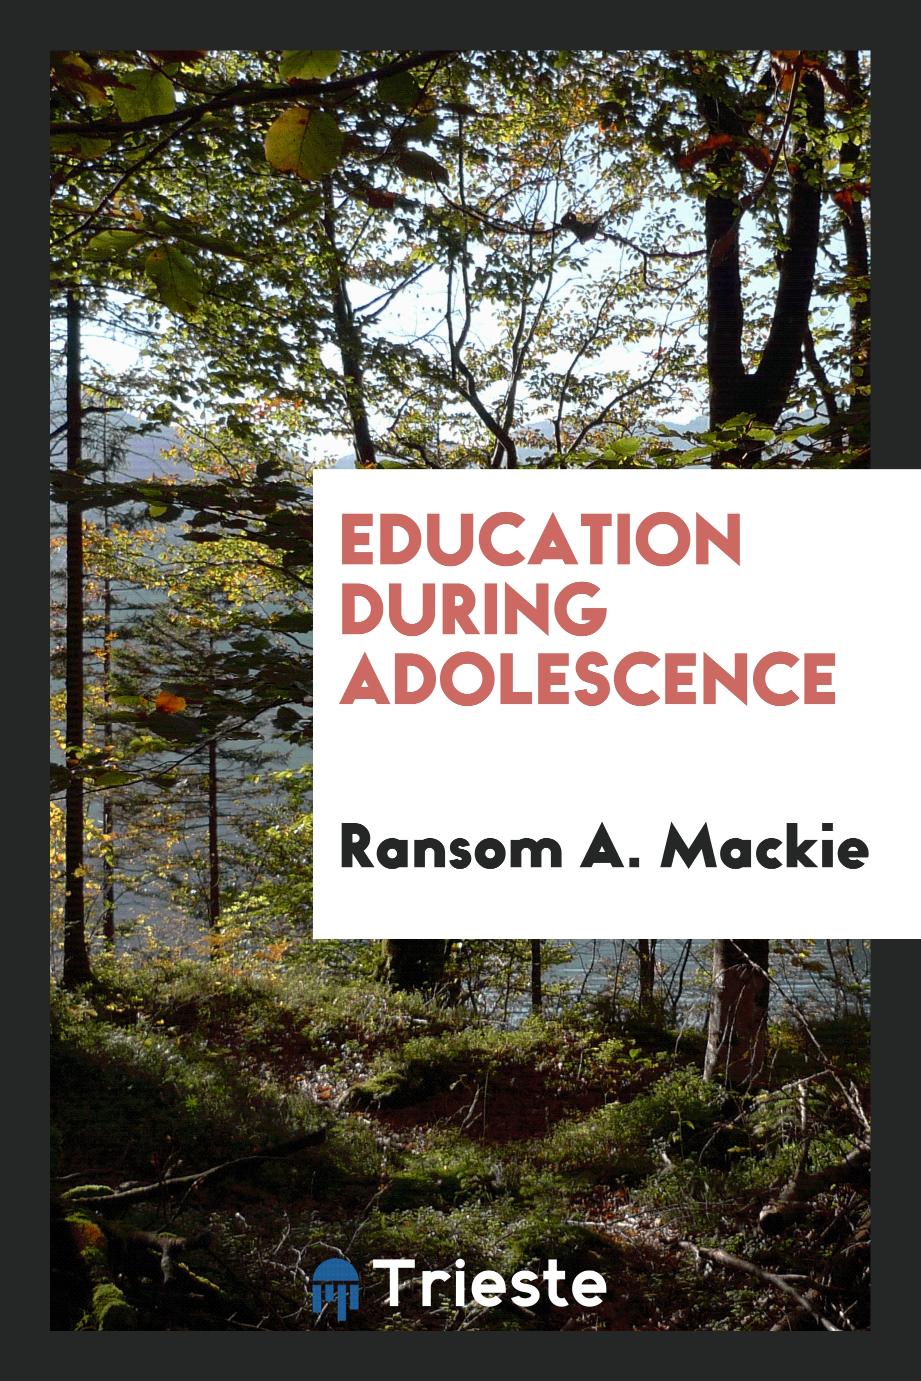 Education during adolescence